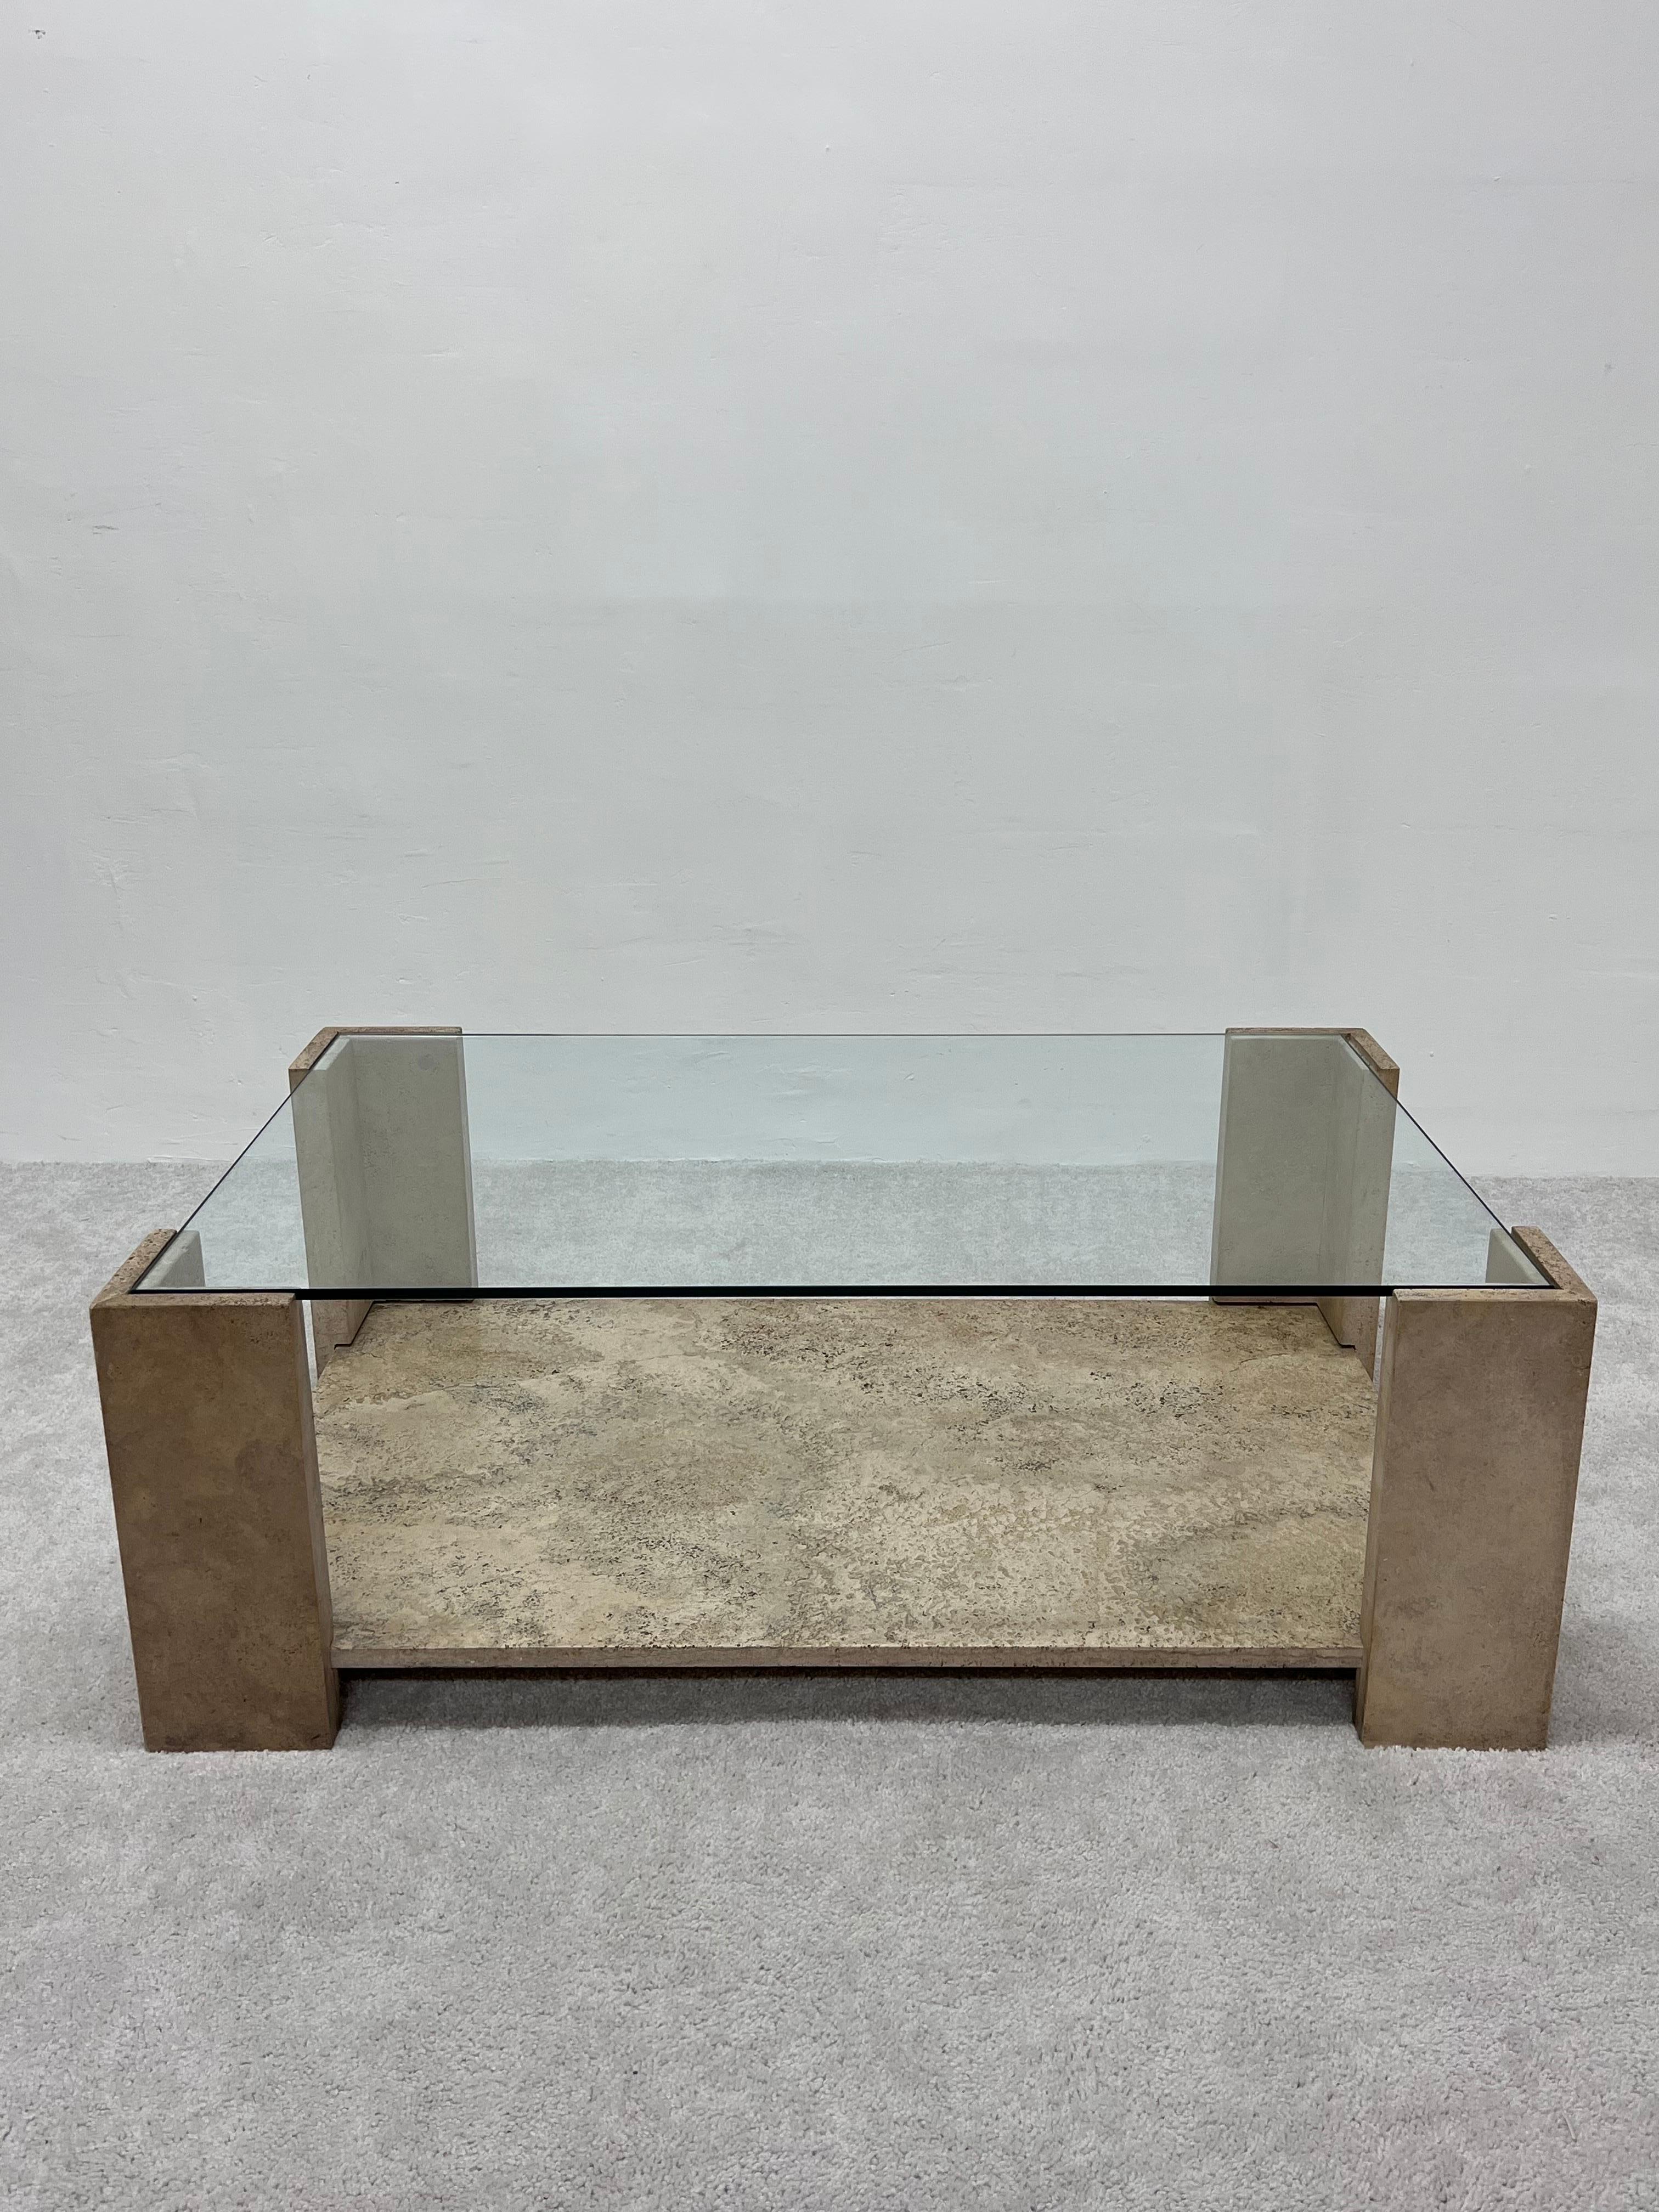 Italian travertine and inset glass top coffee or cocktail table from the 1970s.